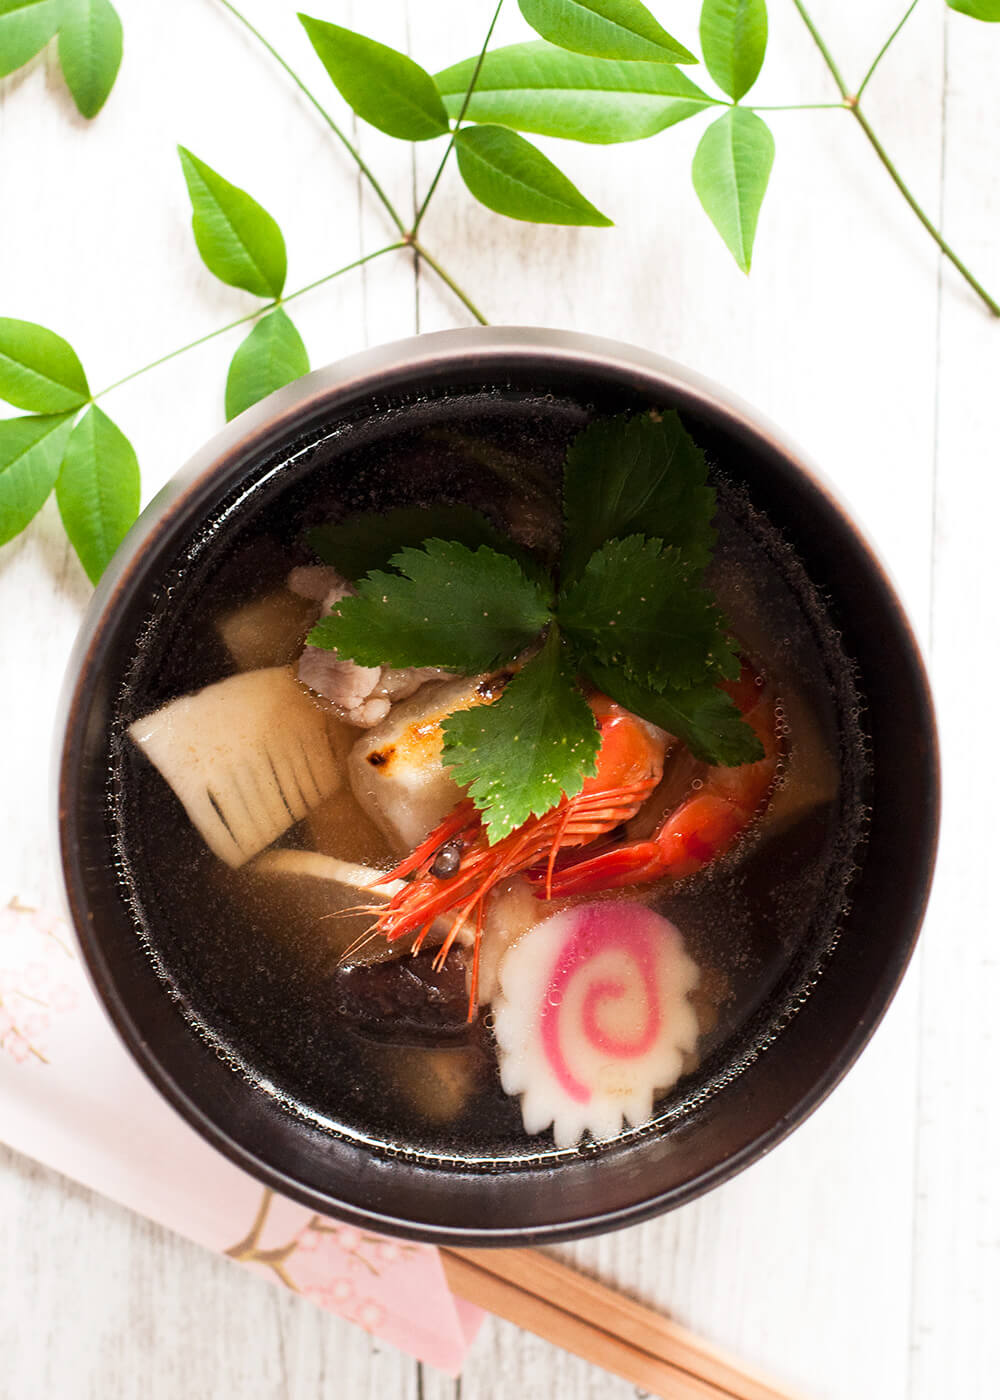 Ozoni is a special dish that most Japanese households serve on New Year’s Day. It is a clear soup with cooked rice cakes and colourful ingredients such as prawns, shiitake, and mitsuba (wild Japanese parsley). Ingredients can vary and you can even make it vegetarian.